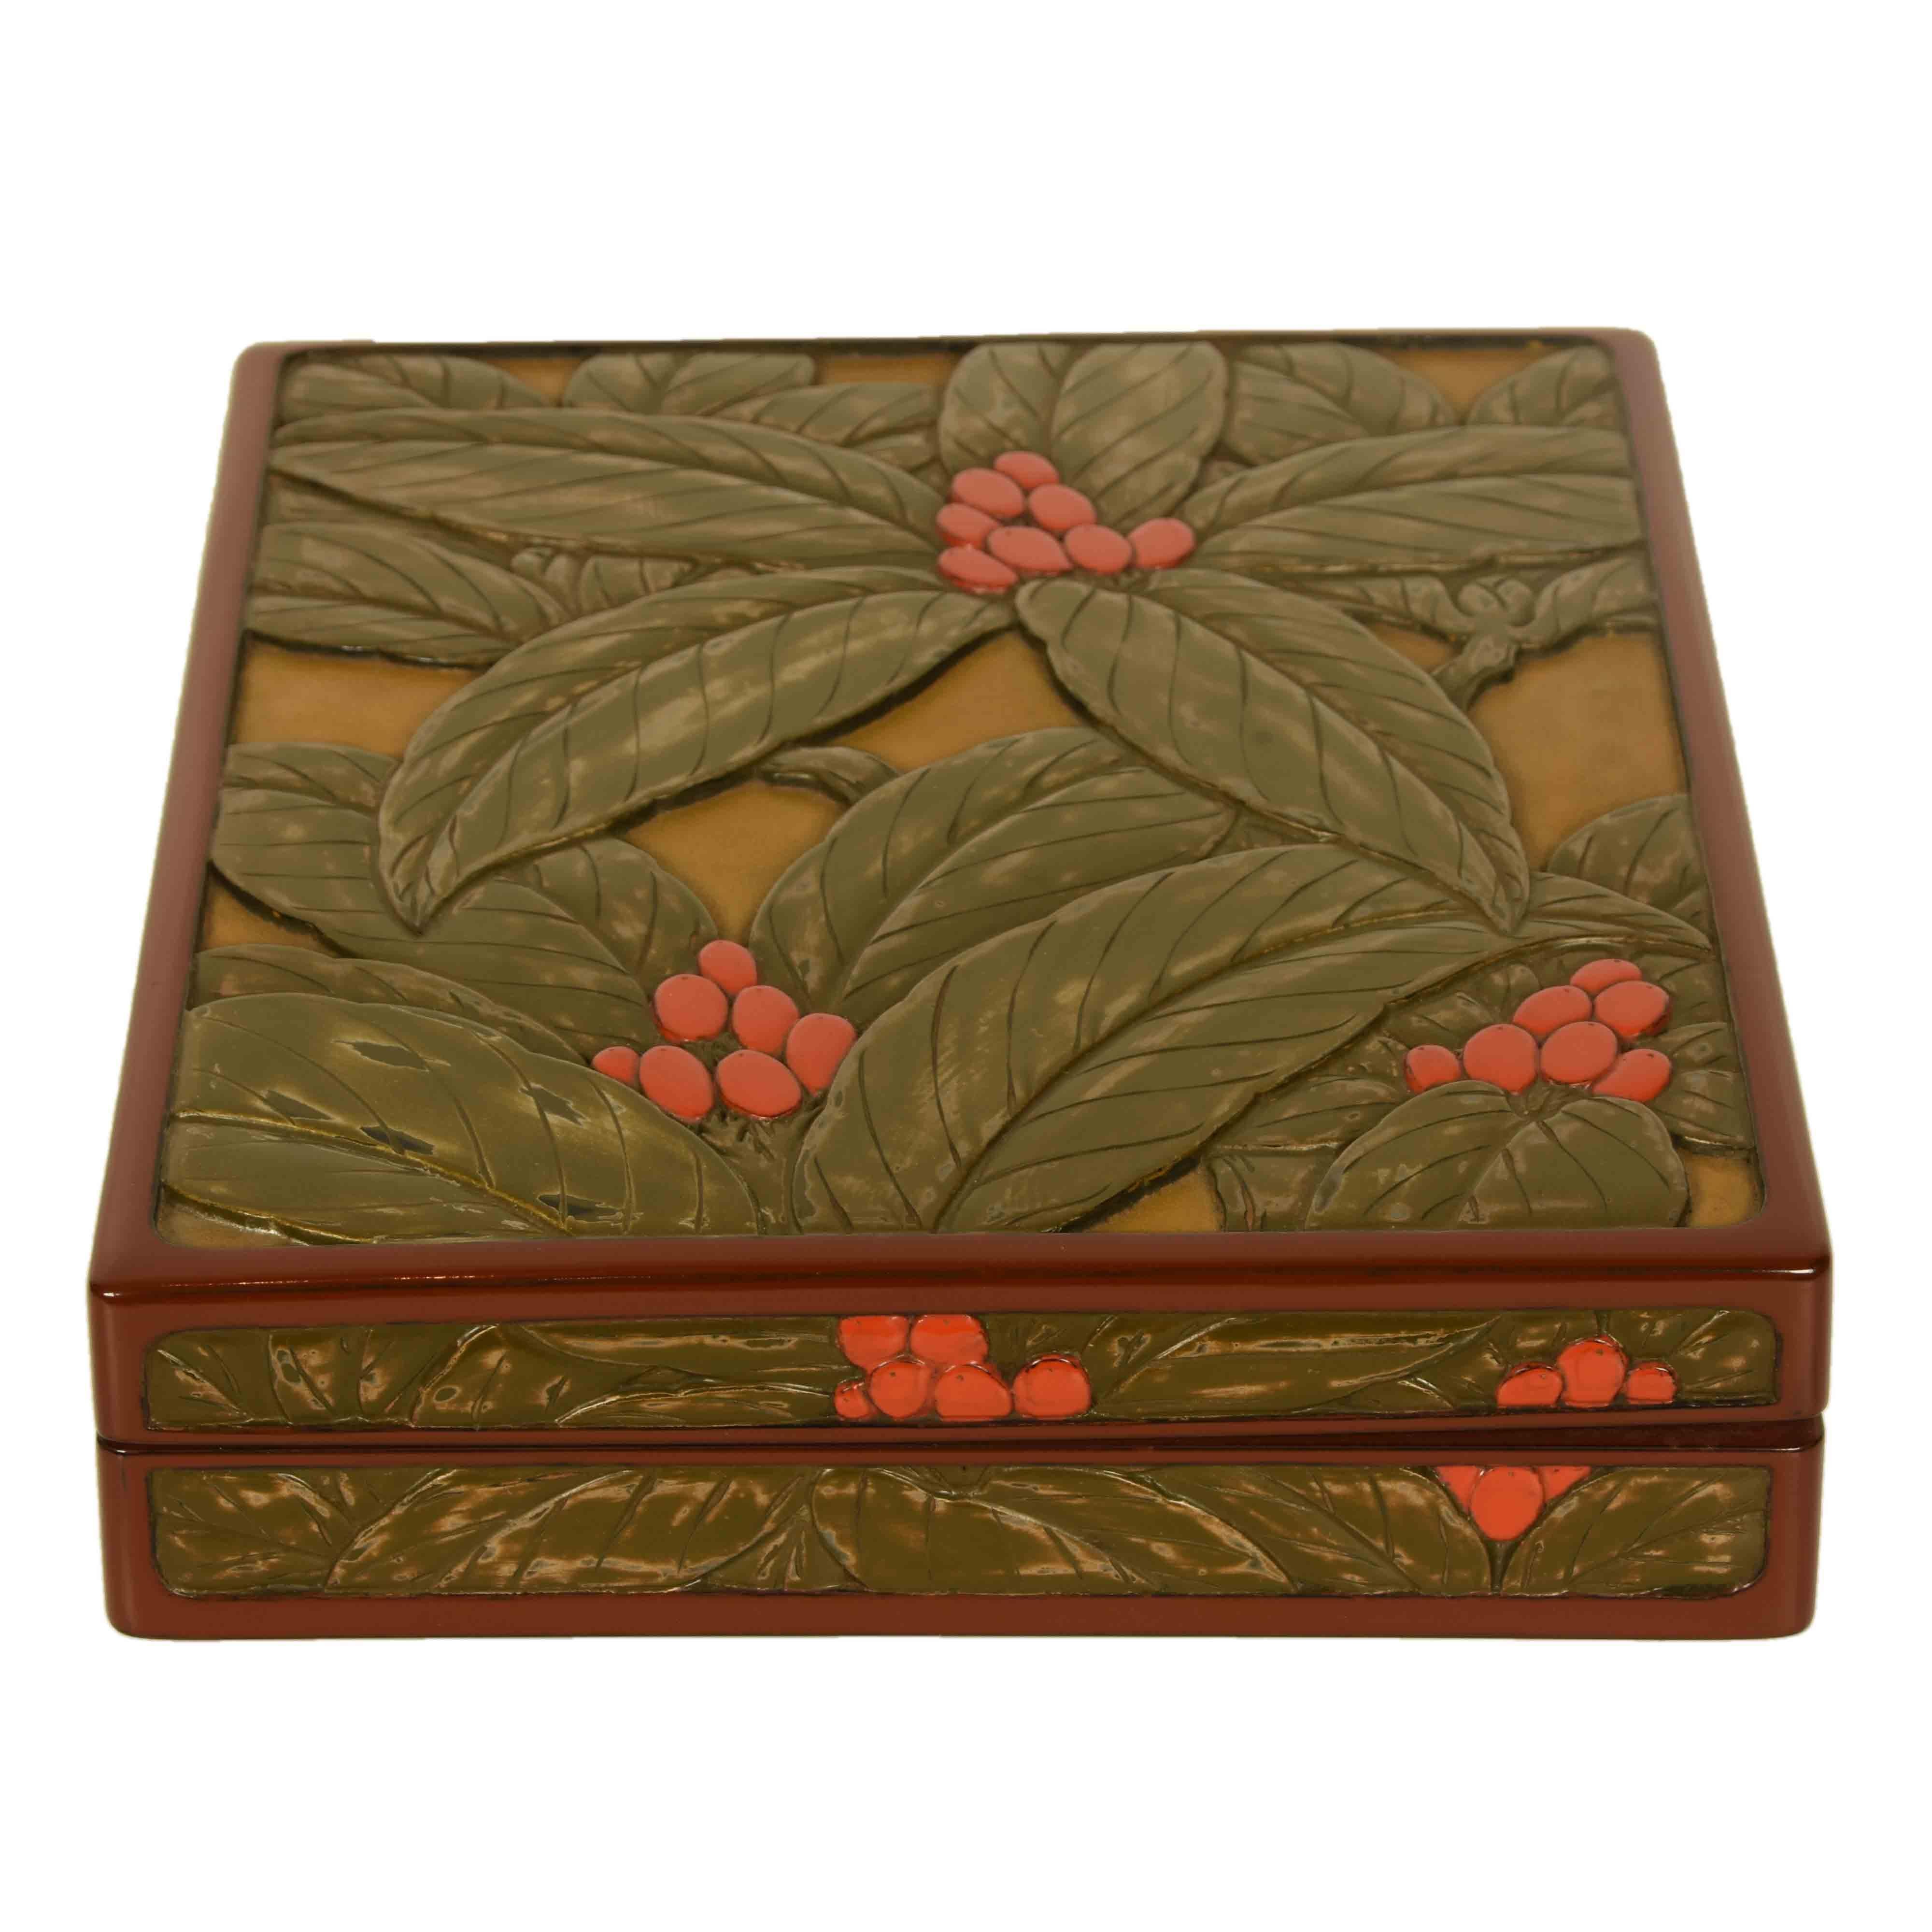 Japanese Carved Kamakura Lacquer Box with Botanical Design by Tamerou Ono In Good Condition For Sale In Prahran, Victoria